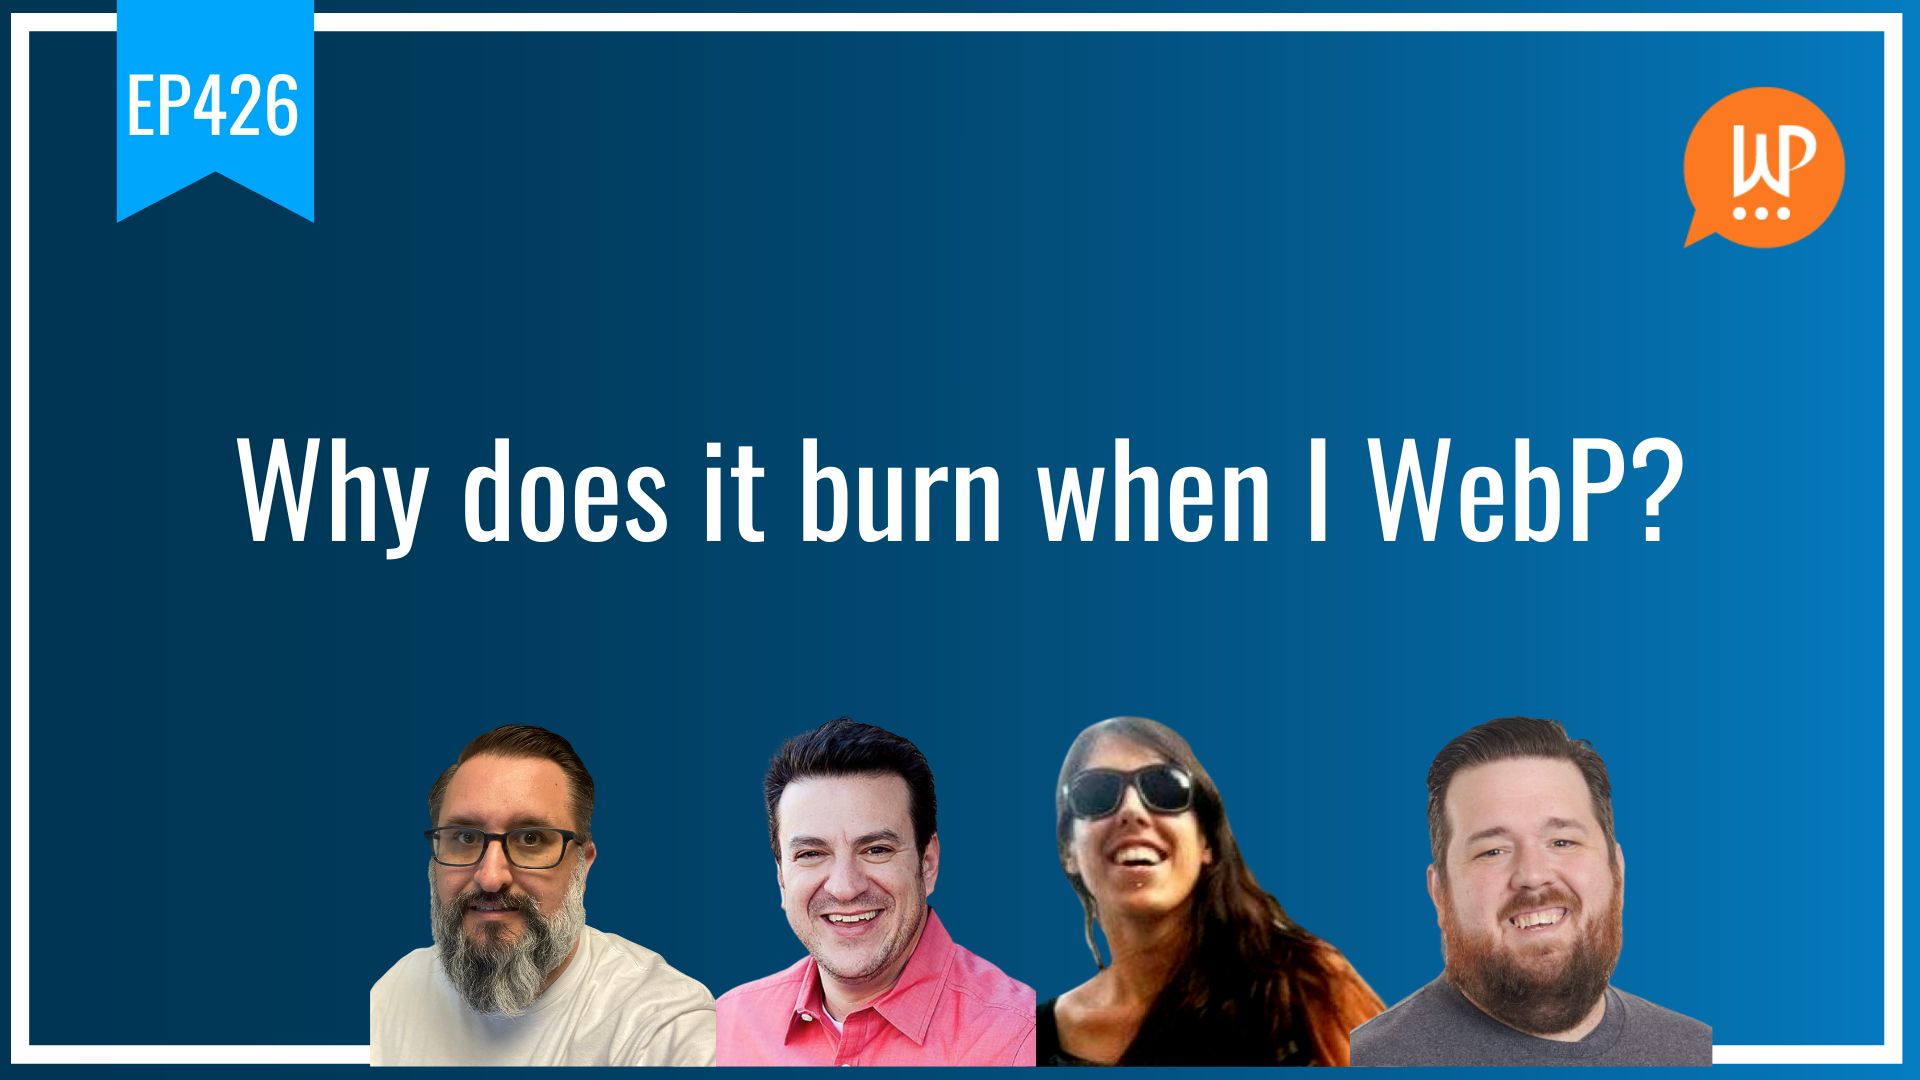 EP426 – Why does it burn when I WebP?